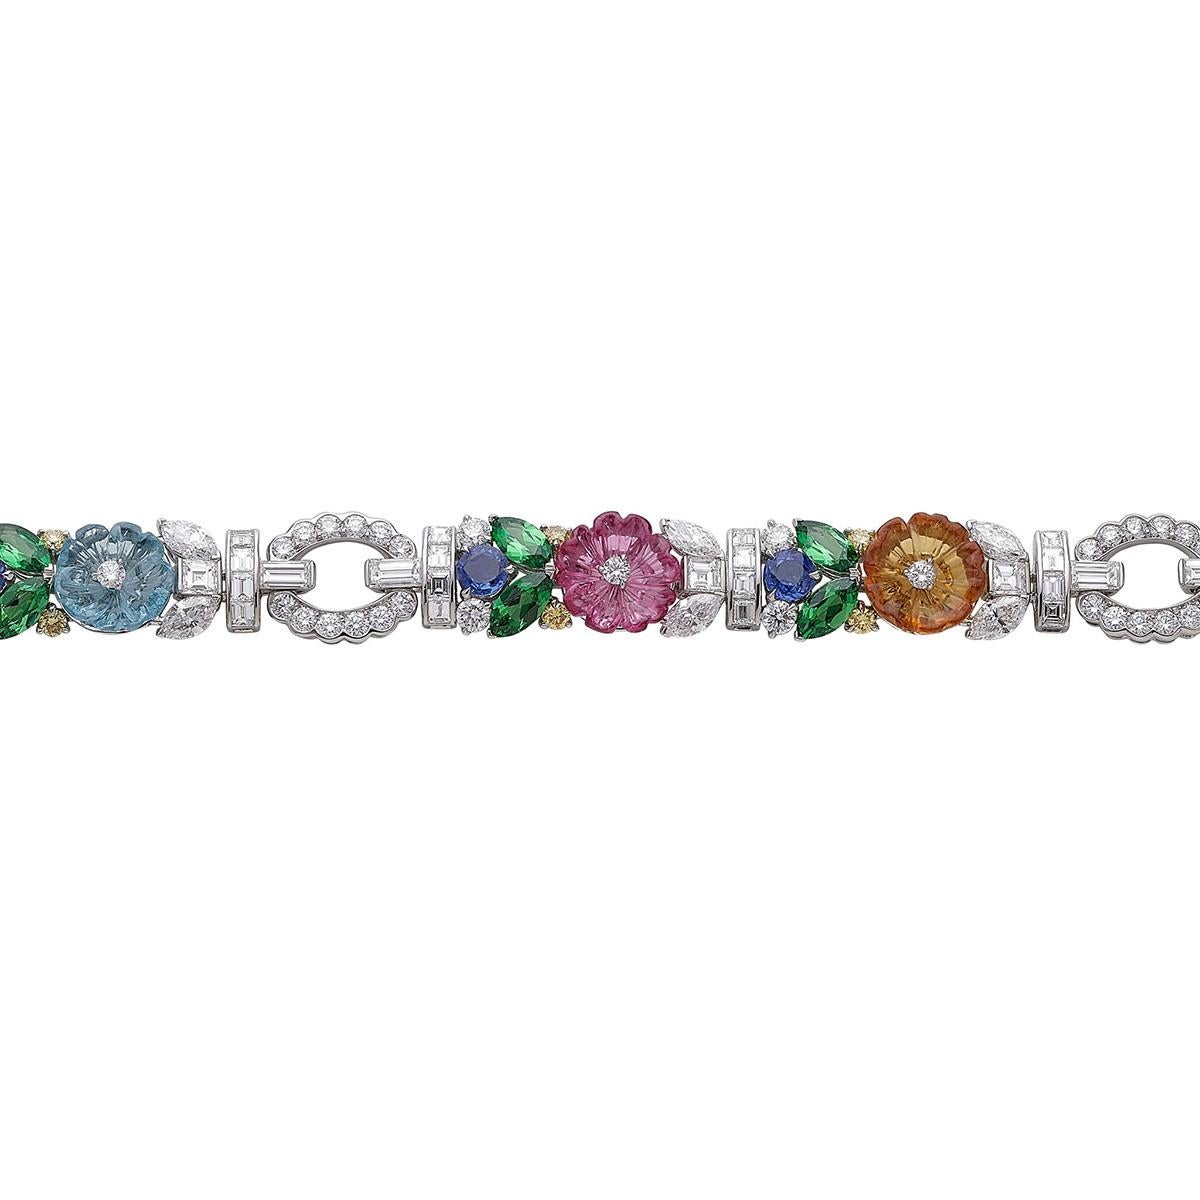 Carved multicolored gemstone flower bracelet with diamond, sapphire, and tsavorite garnet accents, mounted in polished platinum.

Designed by Raymond C. Yard
Six semi-precious carved gemstones weighing 6.57 total carats (aquamarine, rubellite and